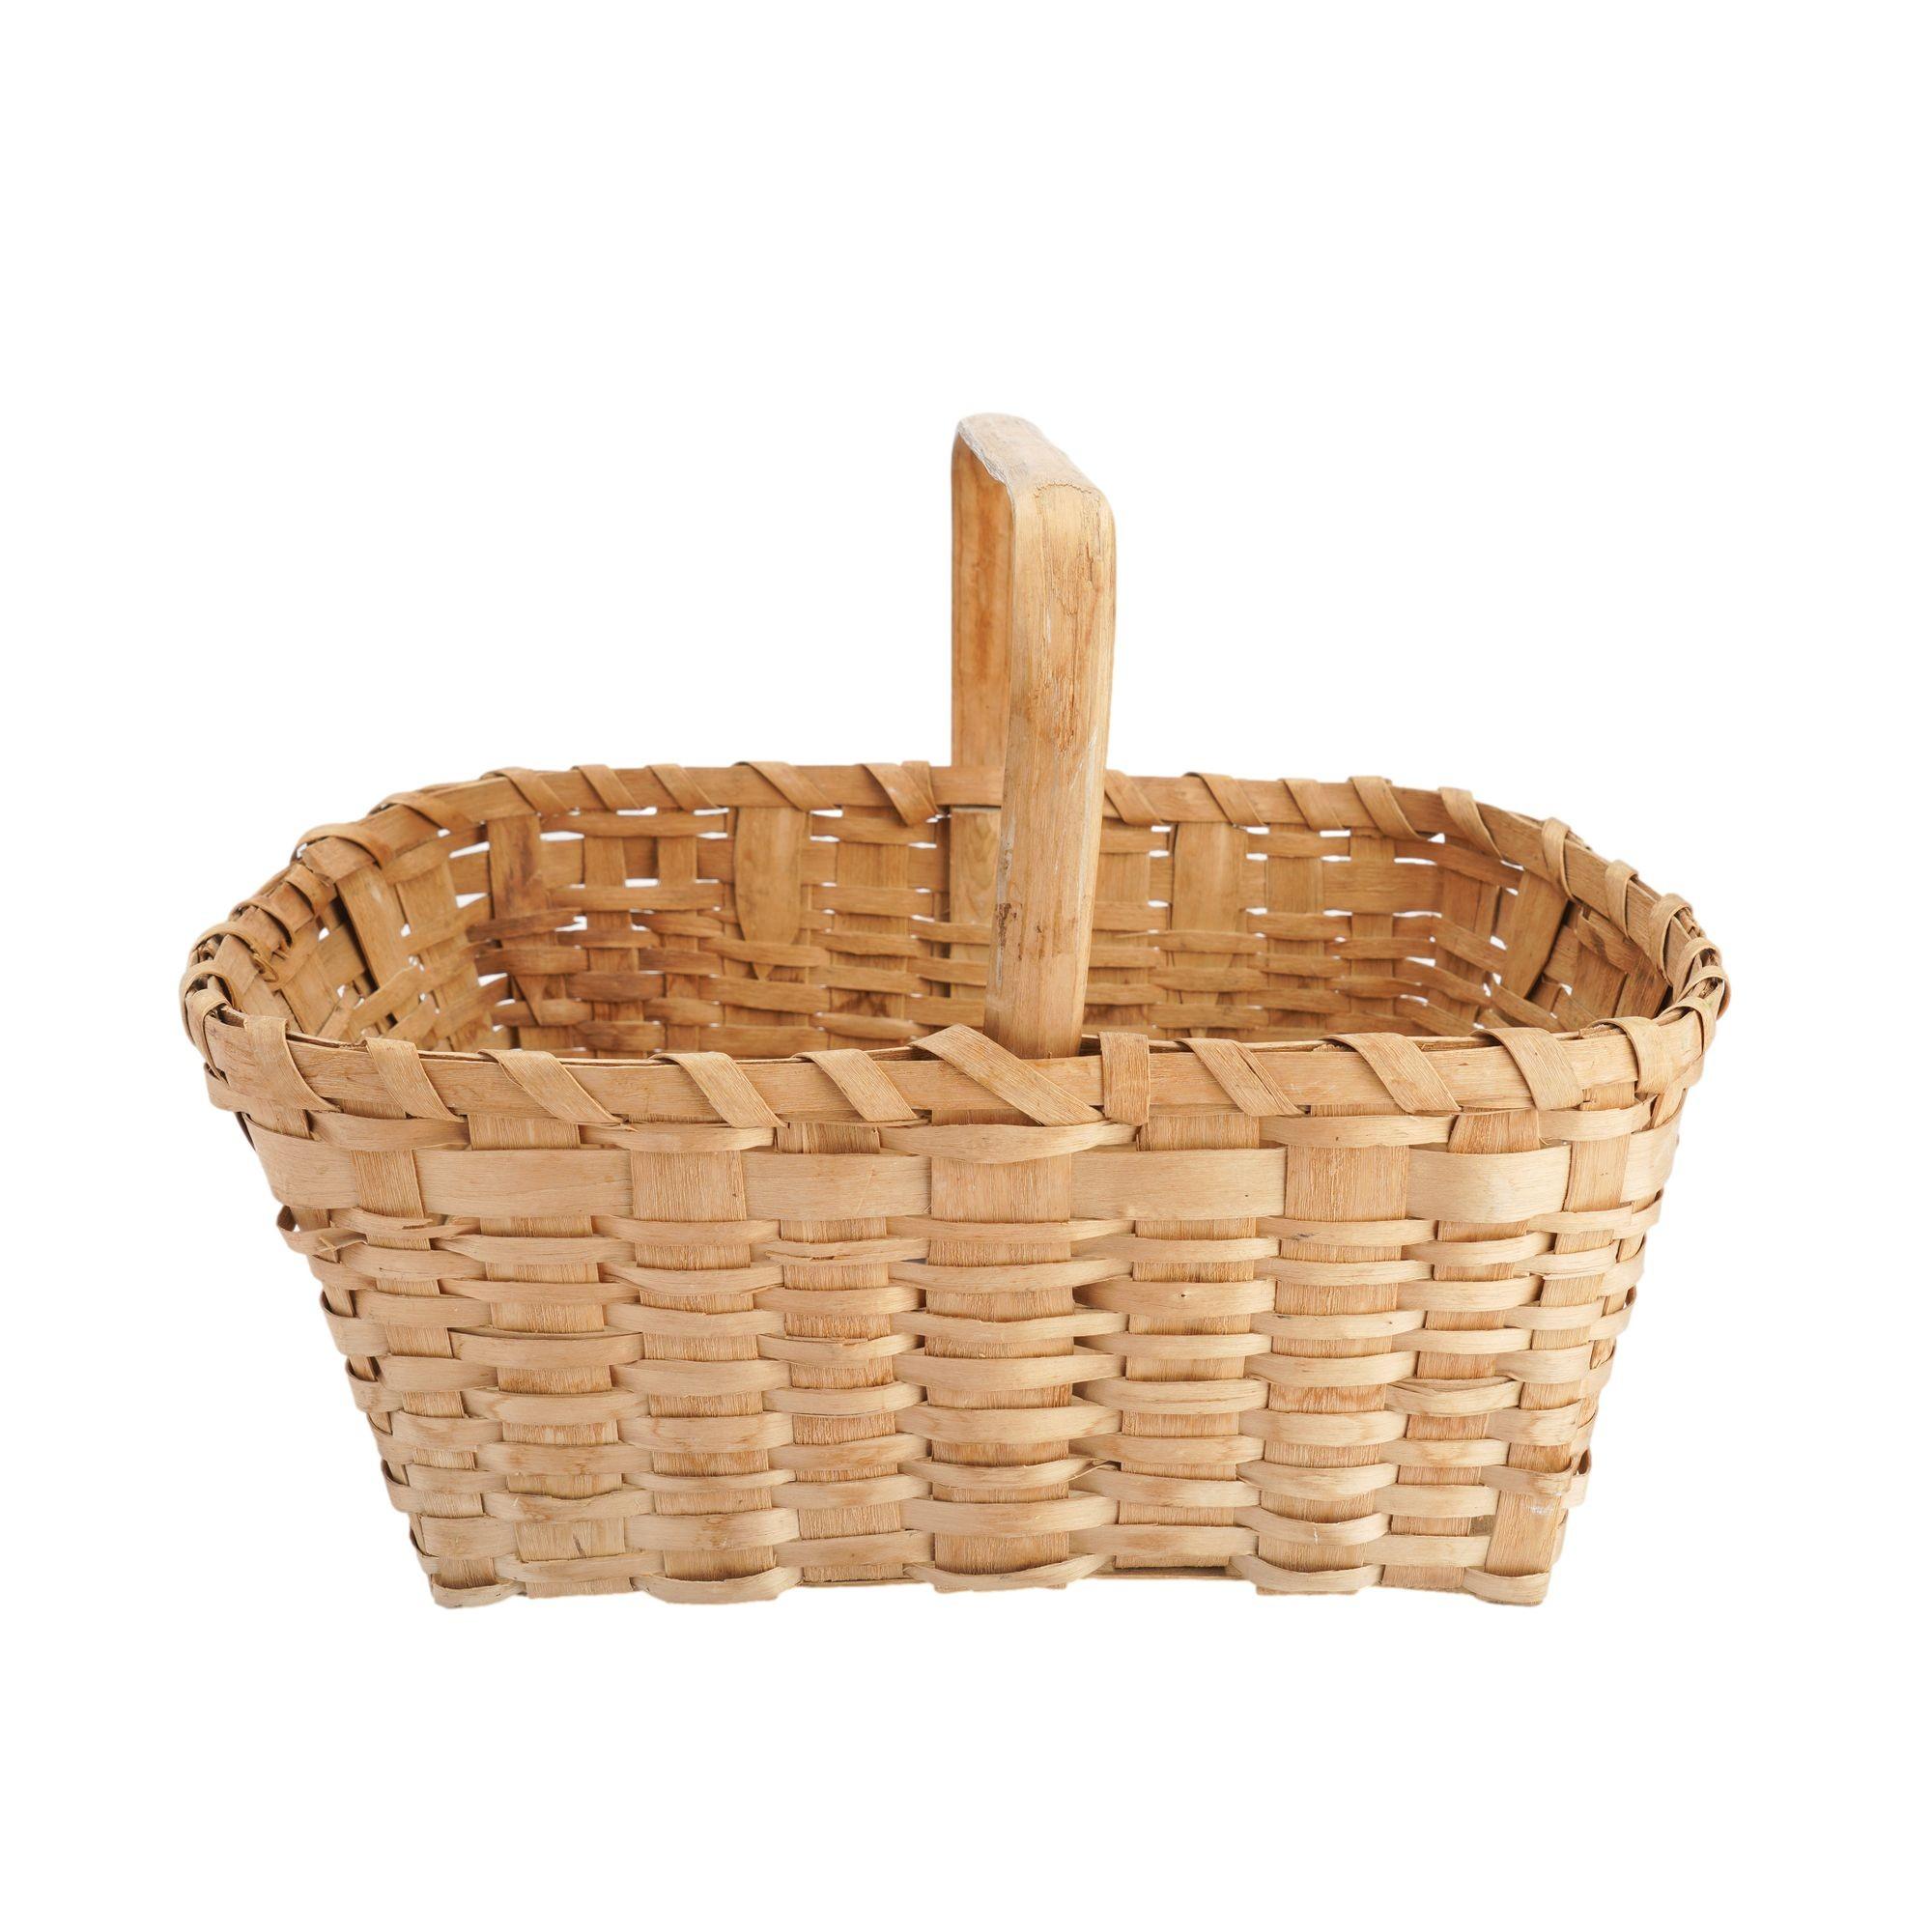 Native American splint ash basket with carved and bent fixed loop handle which has been flattened at the apex. The rim of the basket is comprised of two 3/8